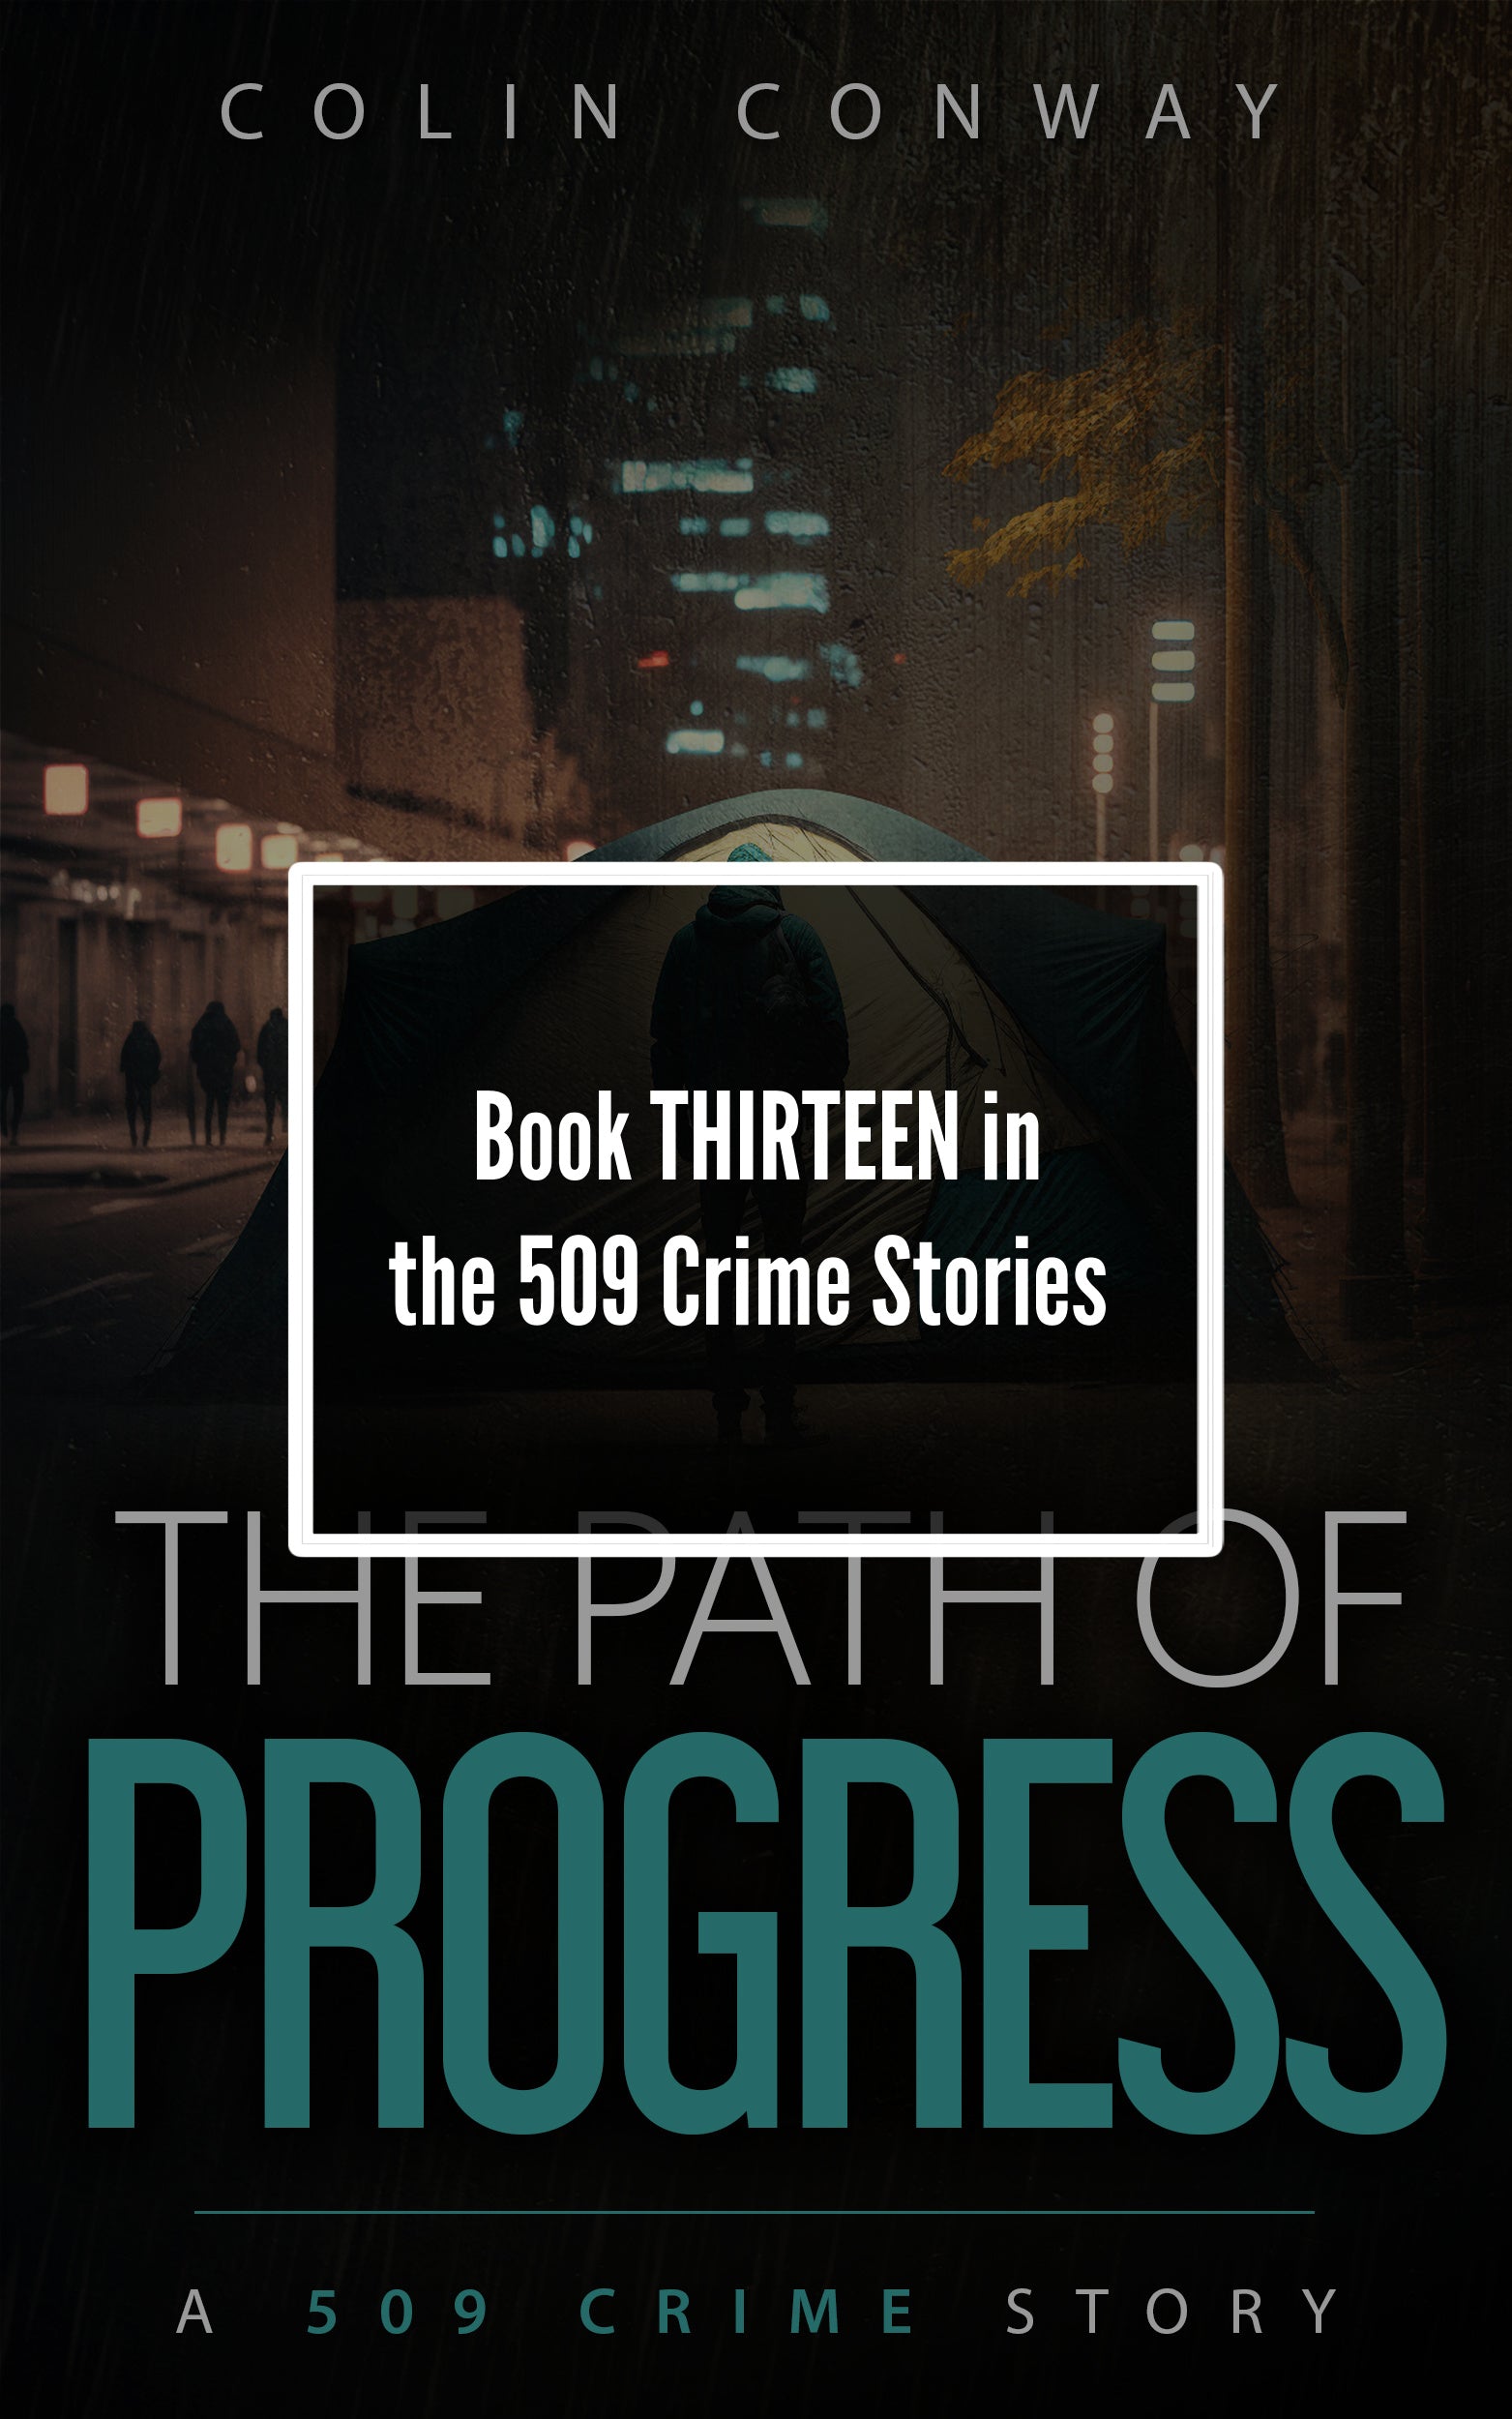 THE PATH OF PROGRESS is an intense crime fiction novel by Colin Conway. Imagine if NYPD BLUE occurred in the Pacific Northwest, and you’ll have a good idea of what this series is about.